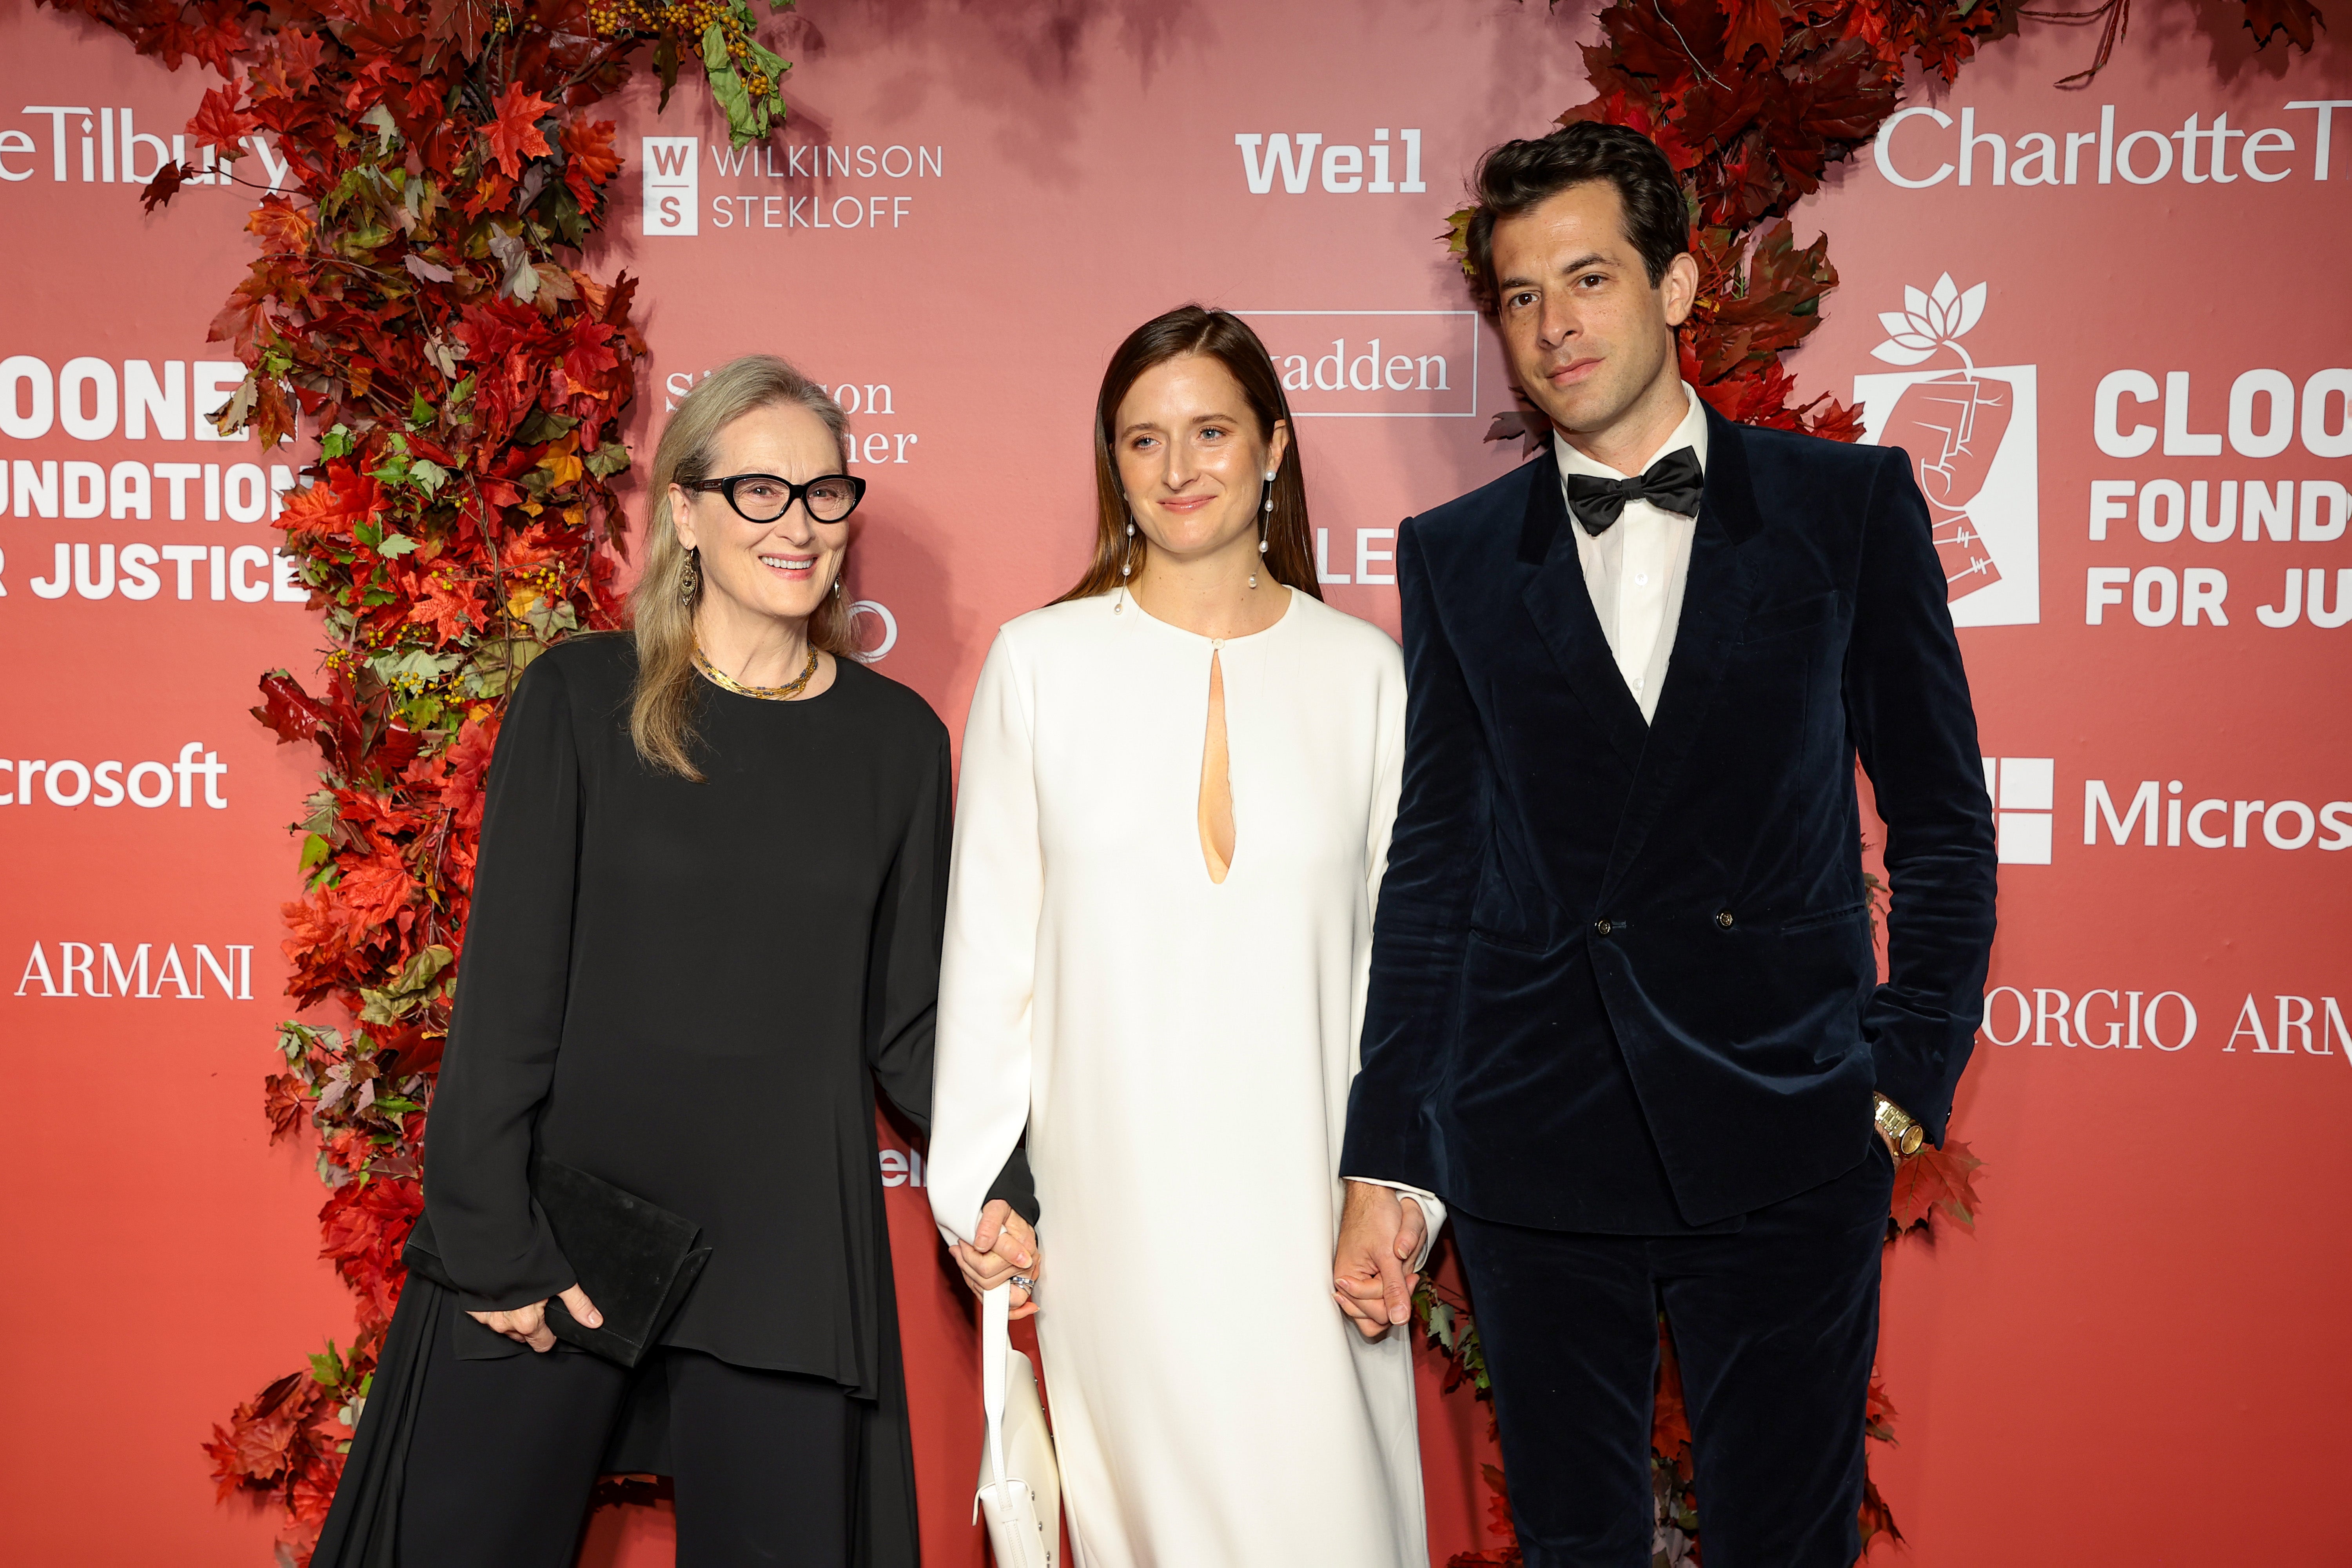 Meryl Streep, Grace Gummer, and Mark Ronson attend Clooney Foundation For Justice Inaugural Albie Awards at New York Public Library in September 2022 in New York City